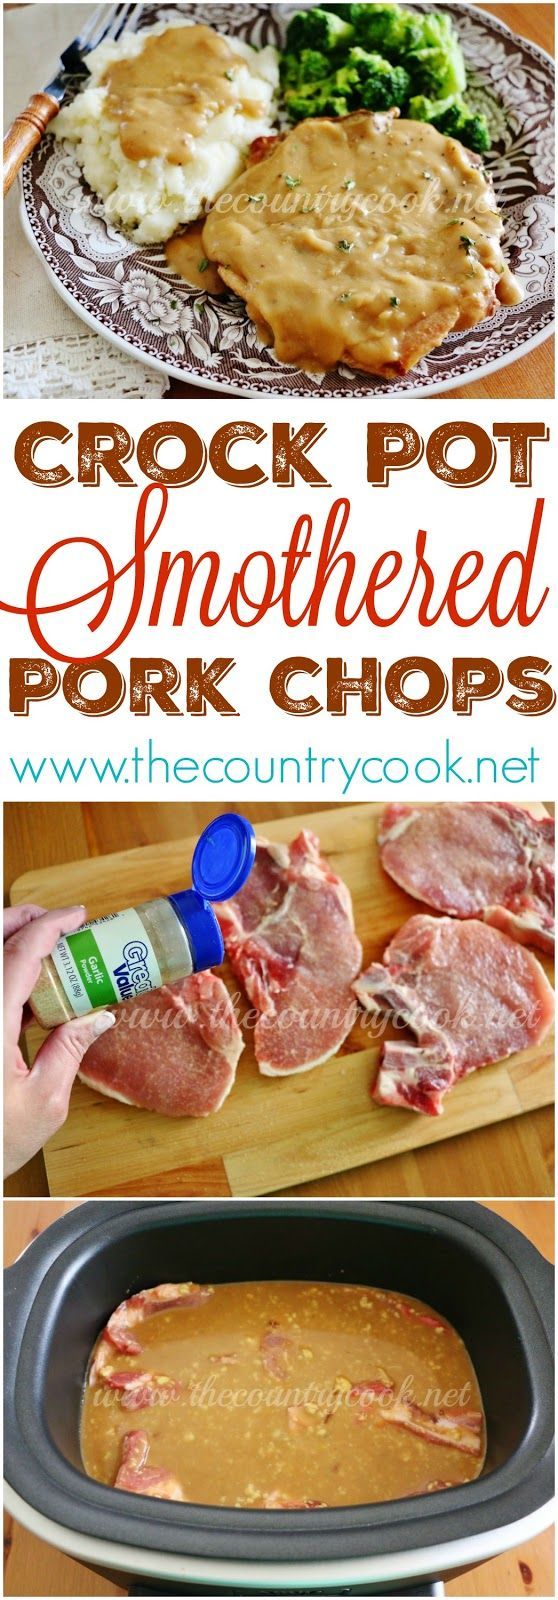 Crockpot Smothered Pork Chops recipe from The Country Cook